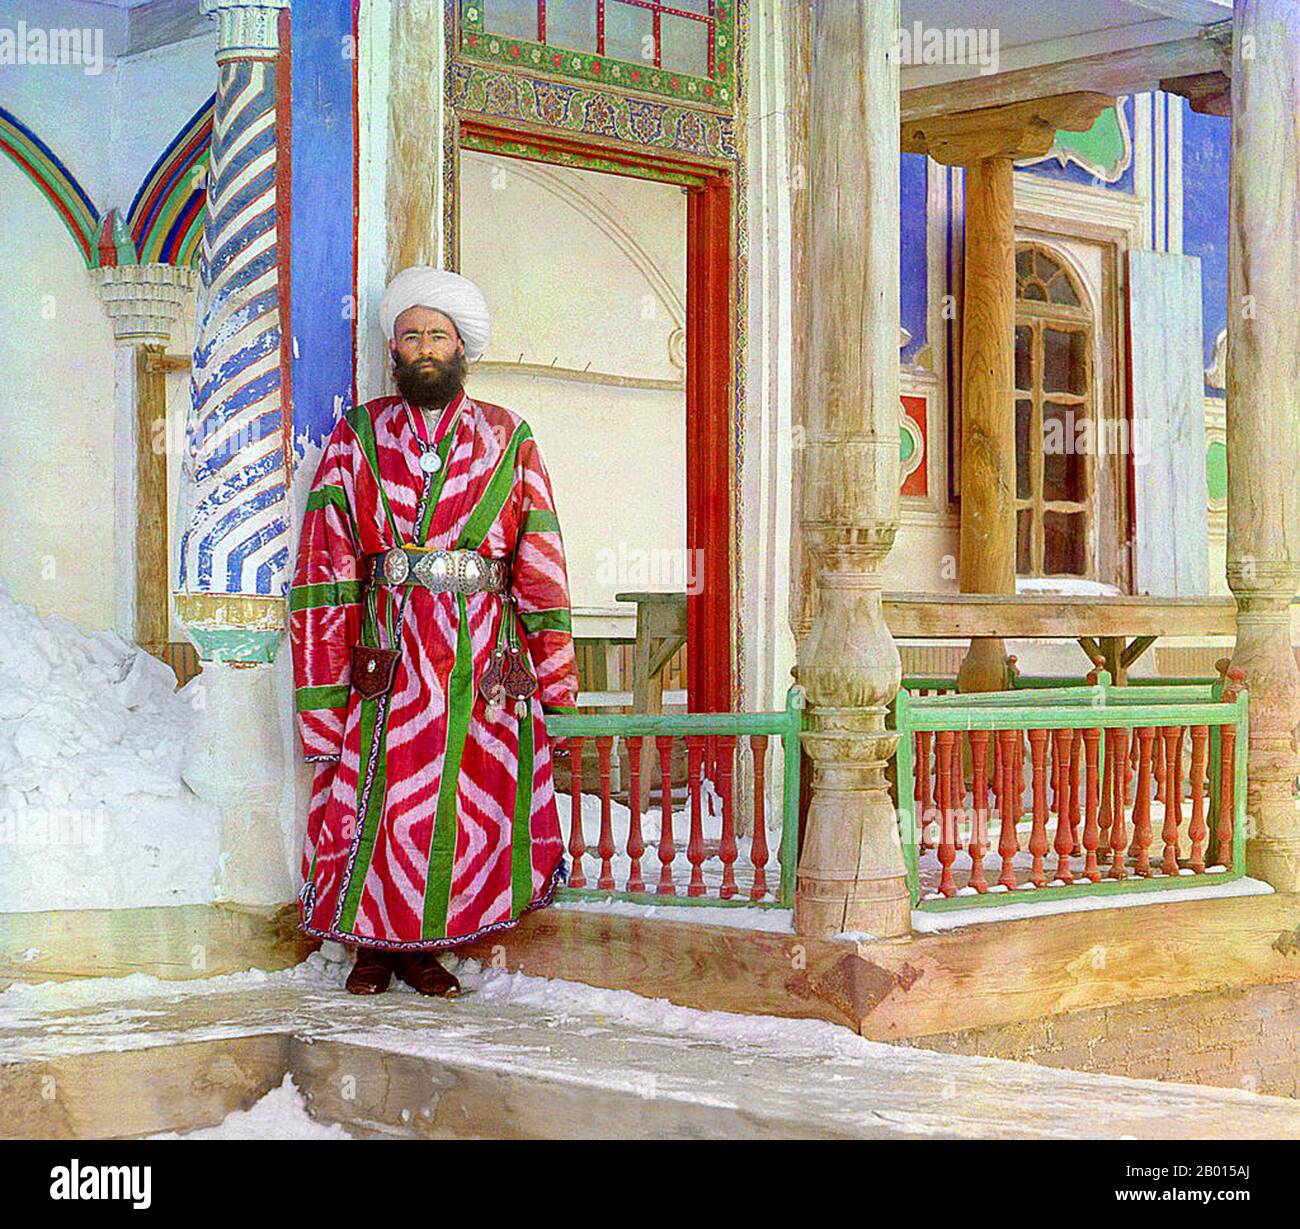 Uzbekistan: A minister of the Emirate of Bukhara in formal dress. Photo by Sergei Prokudin-Gorskii (1863-1944), c. 1905-1915.   Uzbekistan: Flag of the Emirate of Bukhara (1785-1920).  The Emirate of Bukhara  was a Central Asian state that existed from 1785 to 1920. It occupied the land between the Amu Darya and Syr Darya rivers, known formerly as Transoxiana. Its core territory was the land along the lower Zarafshan River, and its urban centres were the ancient cities of Samarkand and the emirate's capital, Bukhara. It was contemporaneous with the Khanate of Khiva to the west, in Khwarezm. Stock Photo